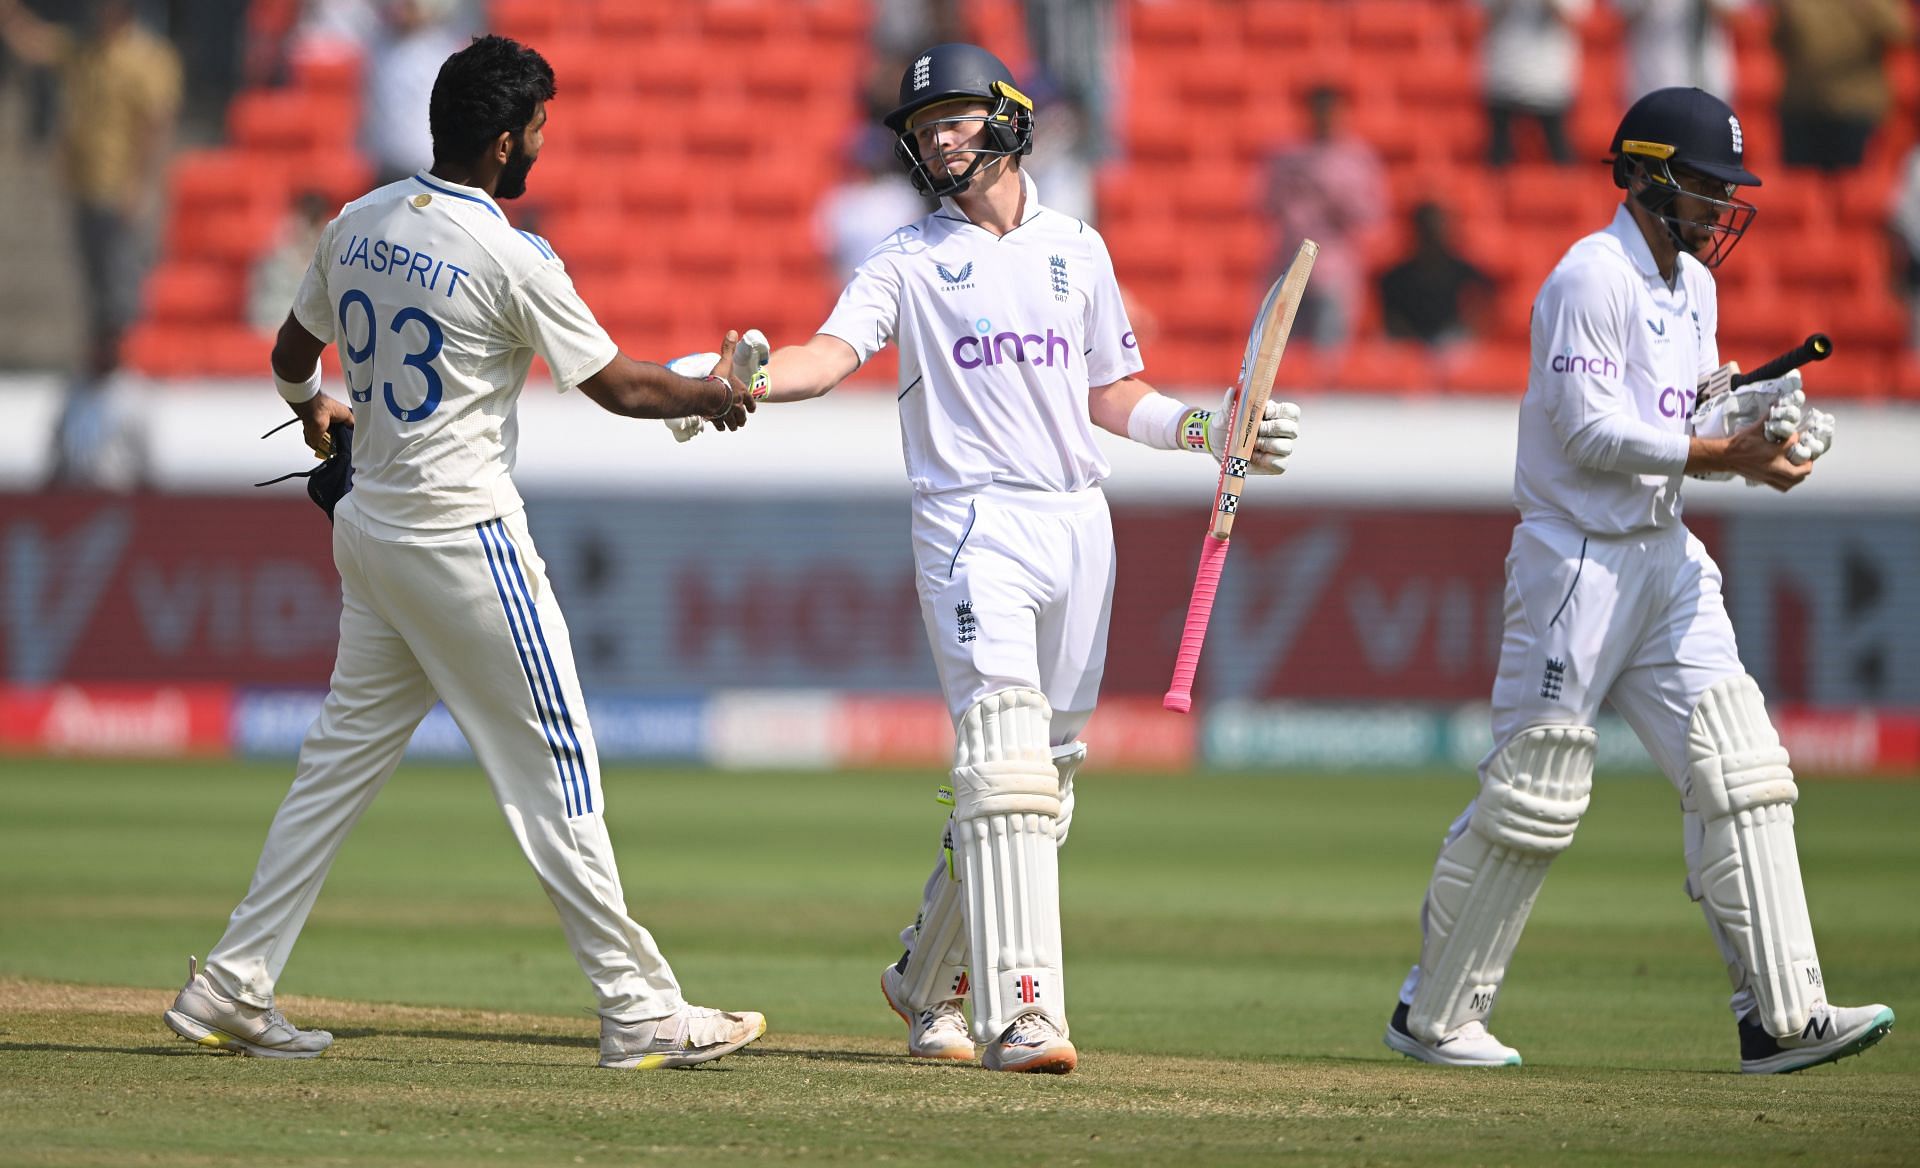 Bumrah dismissed Ollie Pope for 196 (Image: Getty)